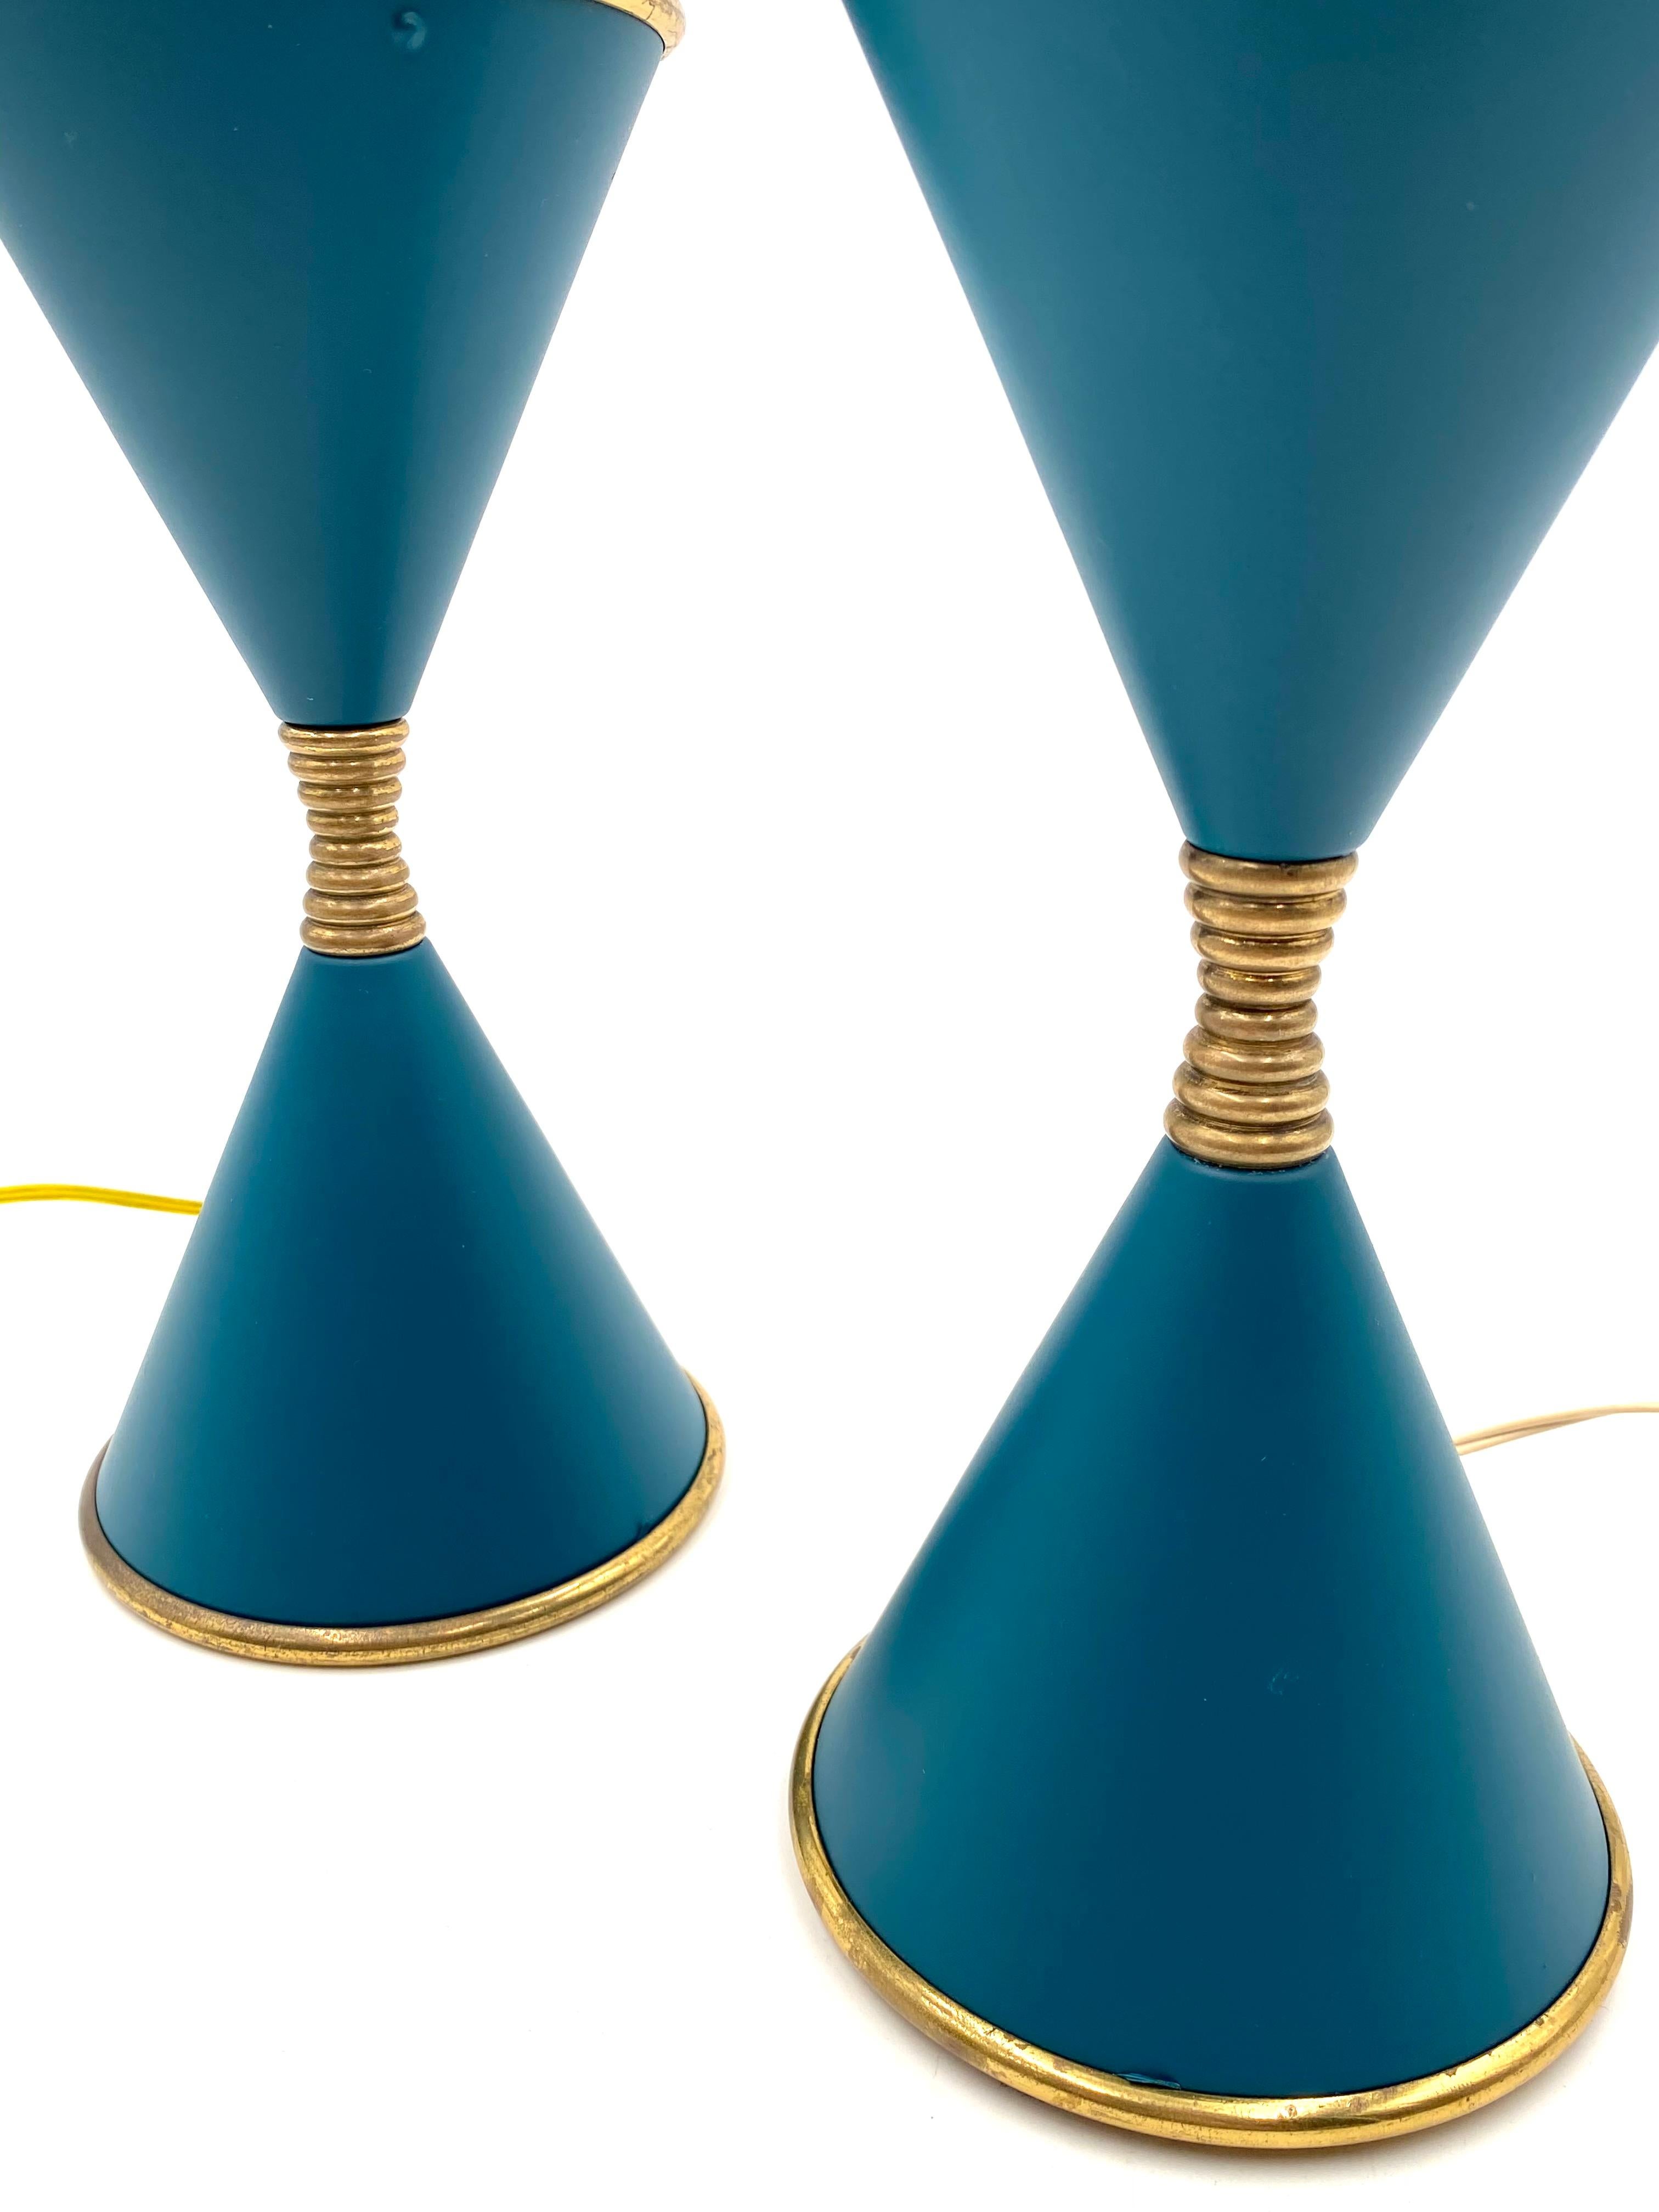 Angelo Lelii, Set of 2 'Clessidra' Table Lamps, Arredoluce, Milan Italy, 1960 In Excellent Condition For Sale In Firenze, IT